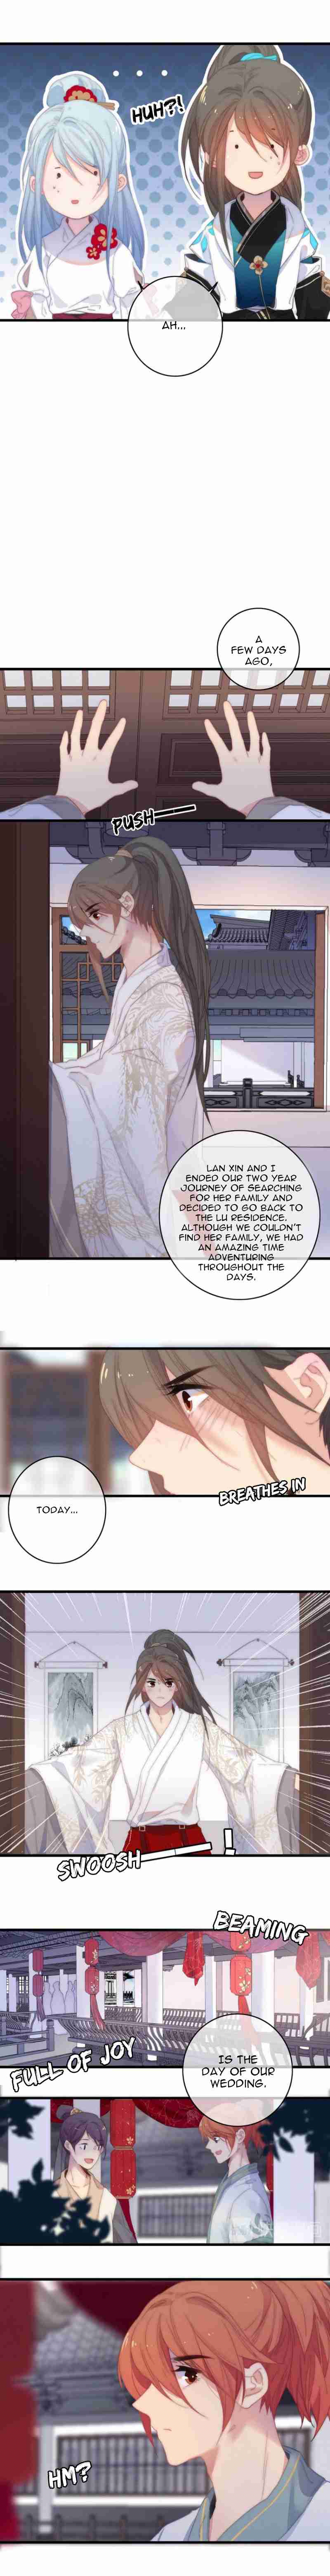 The Love's Oath Ch. 44 Hanging by the thread